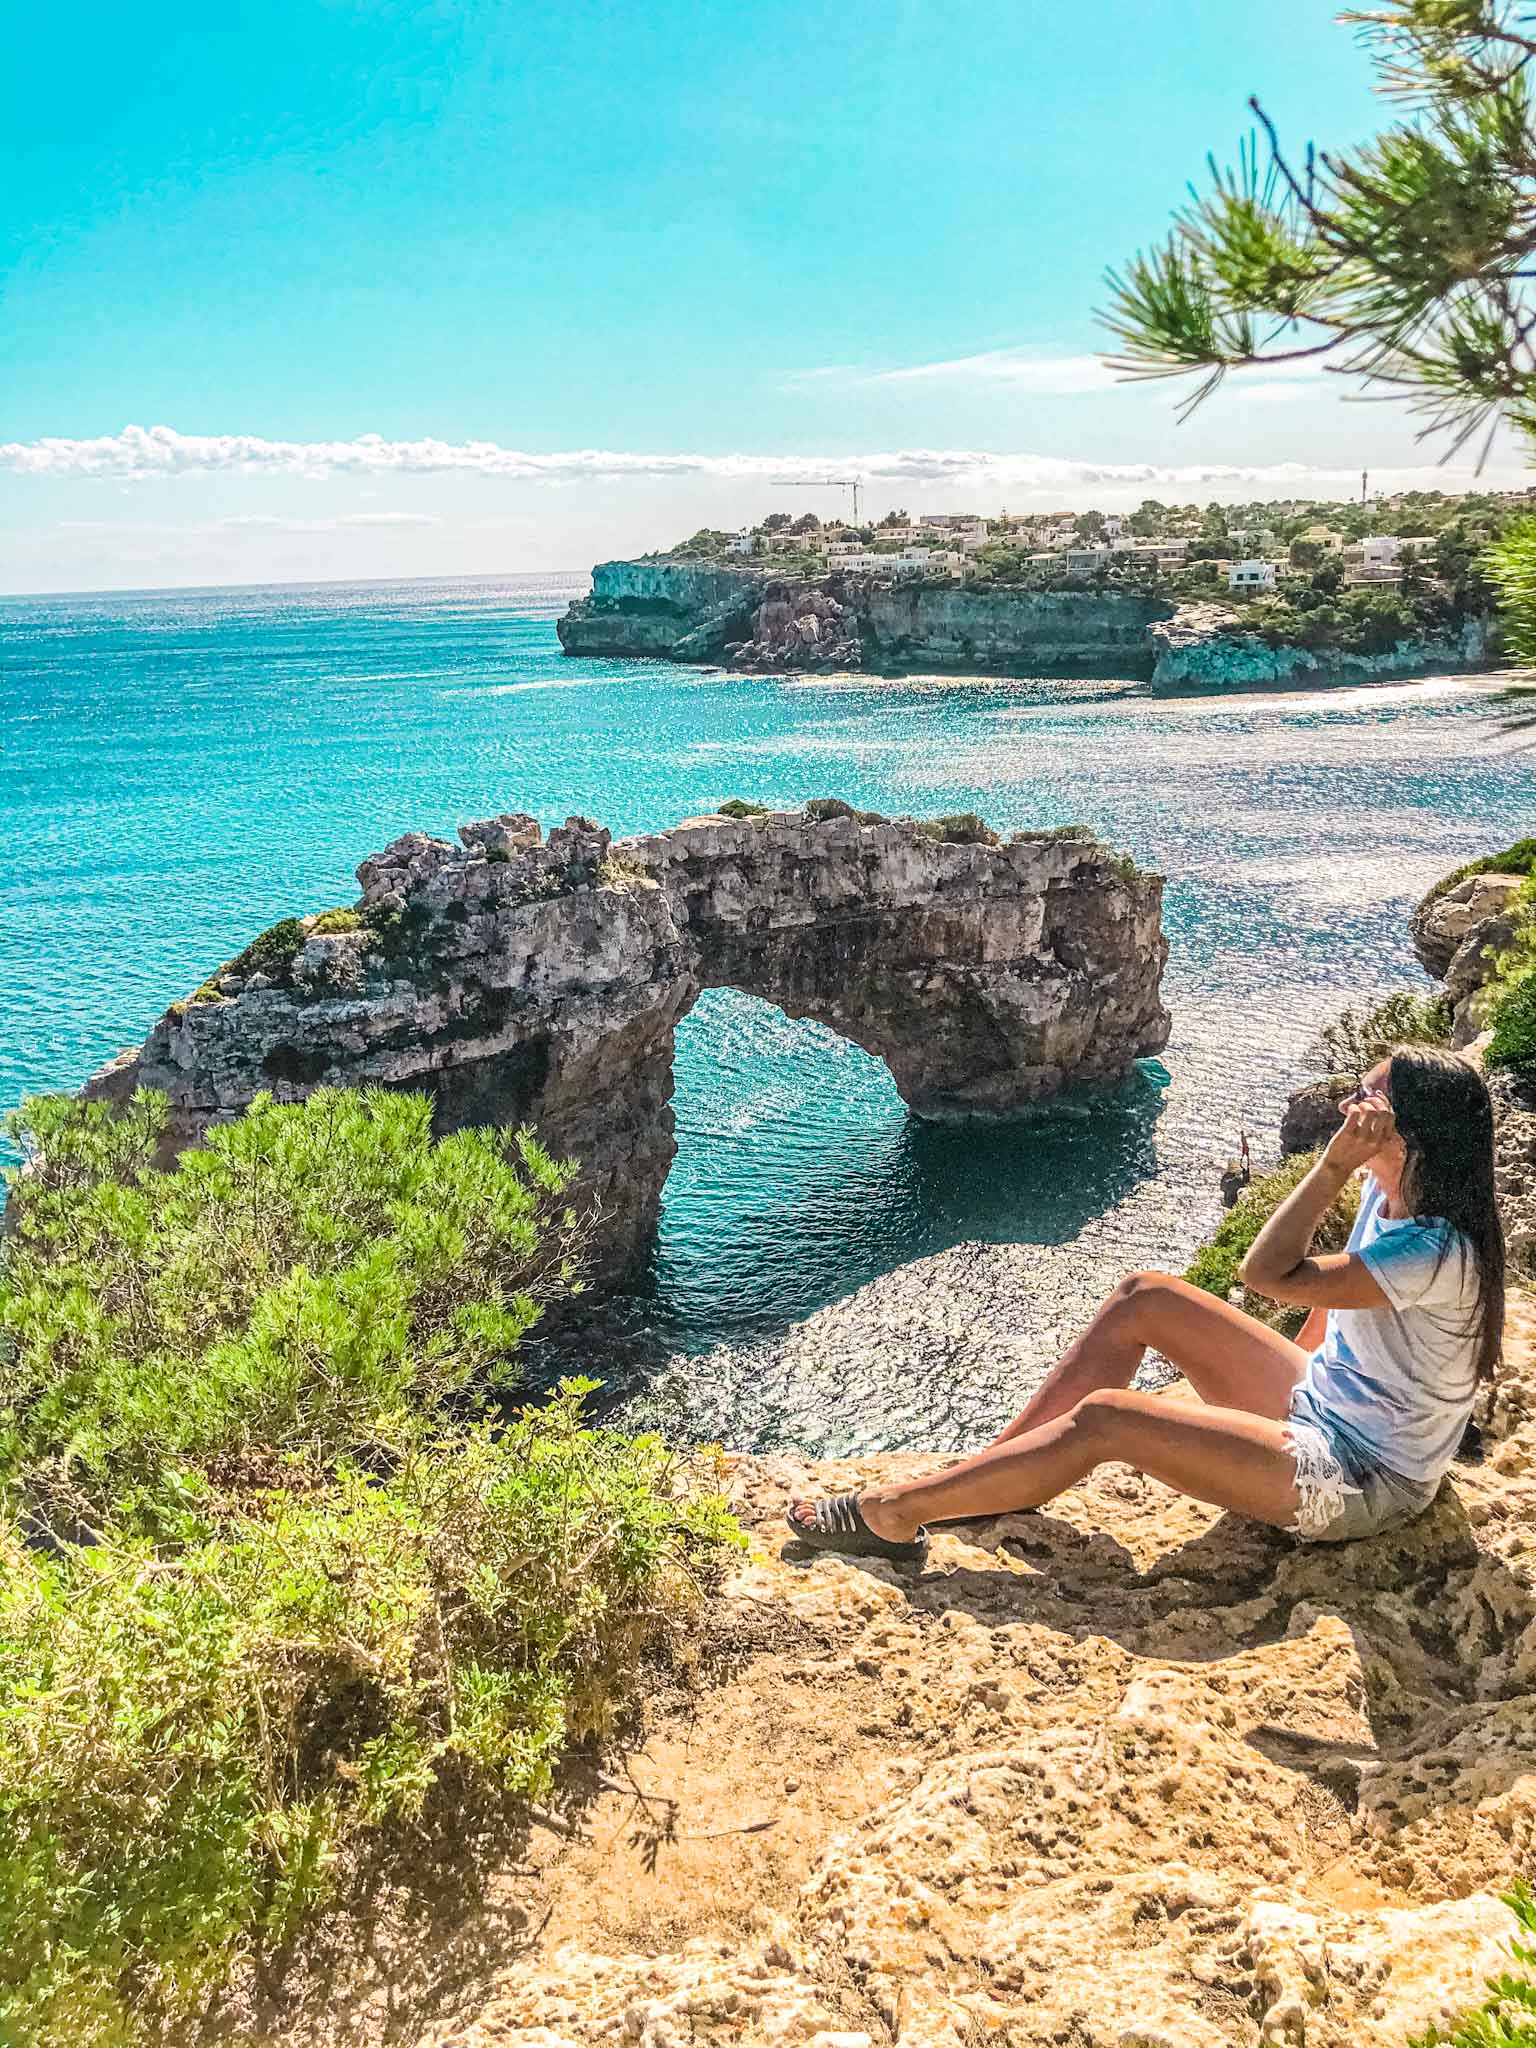 Must-see places: Es Pontàs natural arch in Mallorca